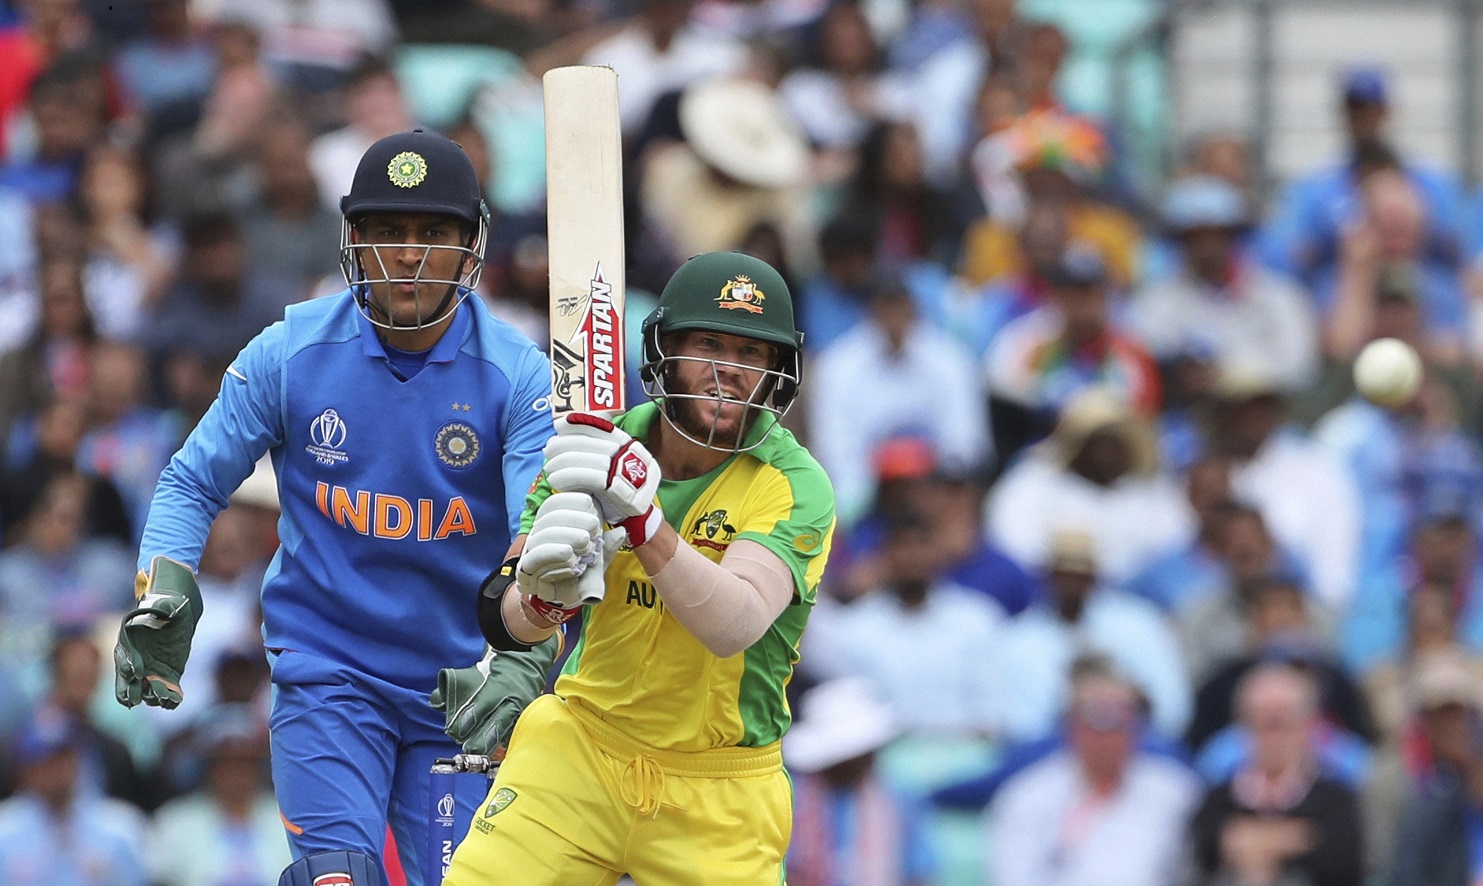 No dagger insignia, Dhoni wears gloves without logo